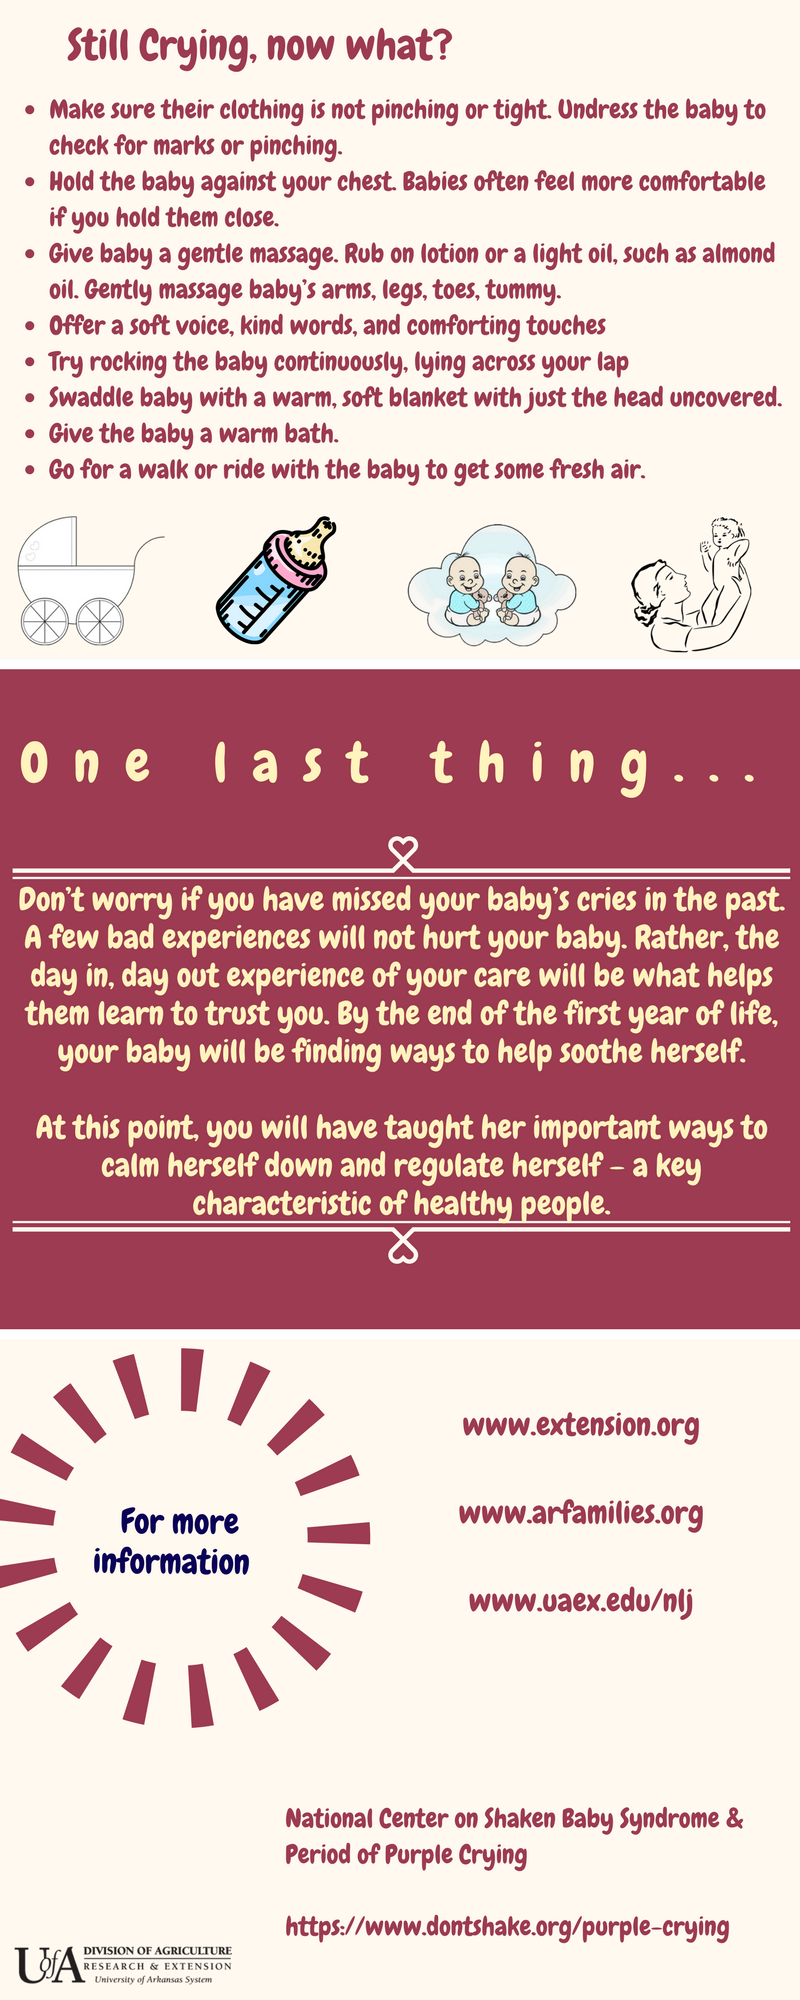 Part 2 of Cry it out infogrpahic